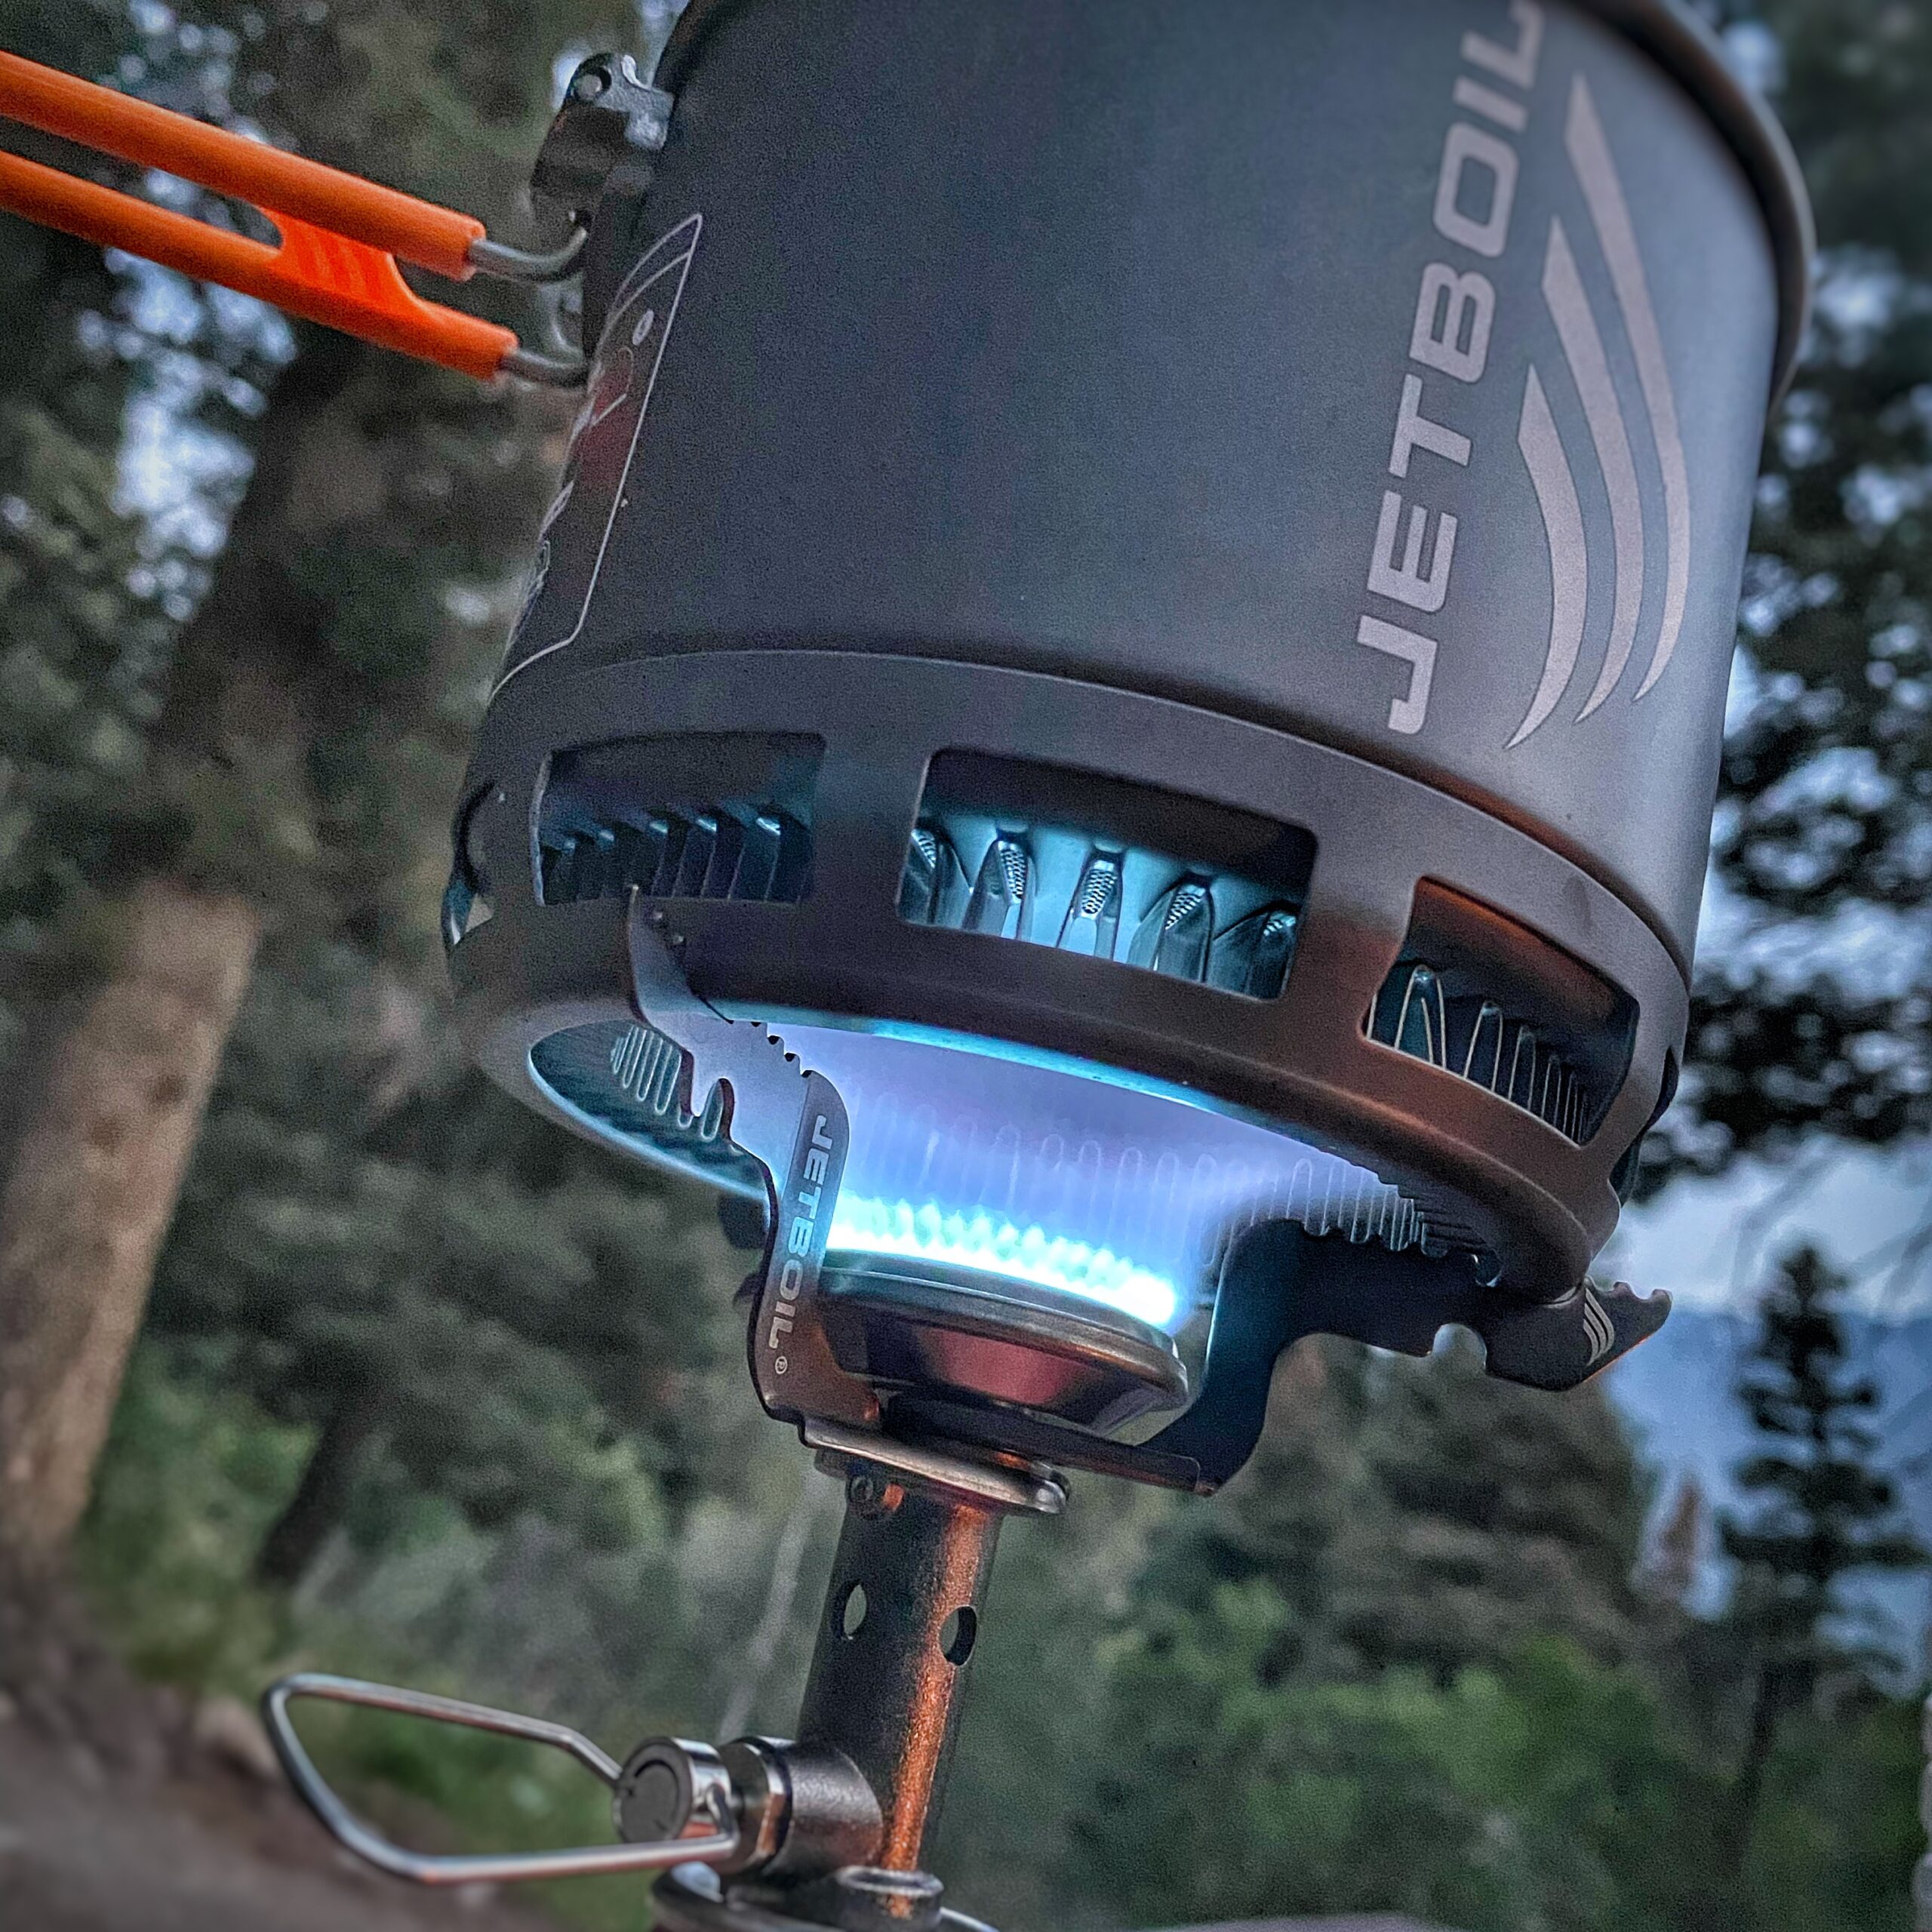 Jetboil Stash Review: The Complete Kit 